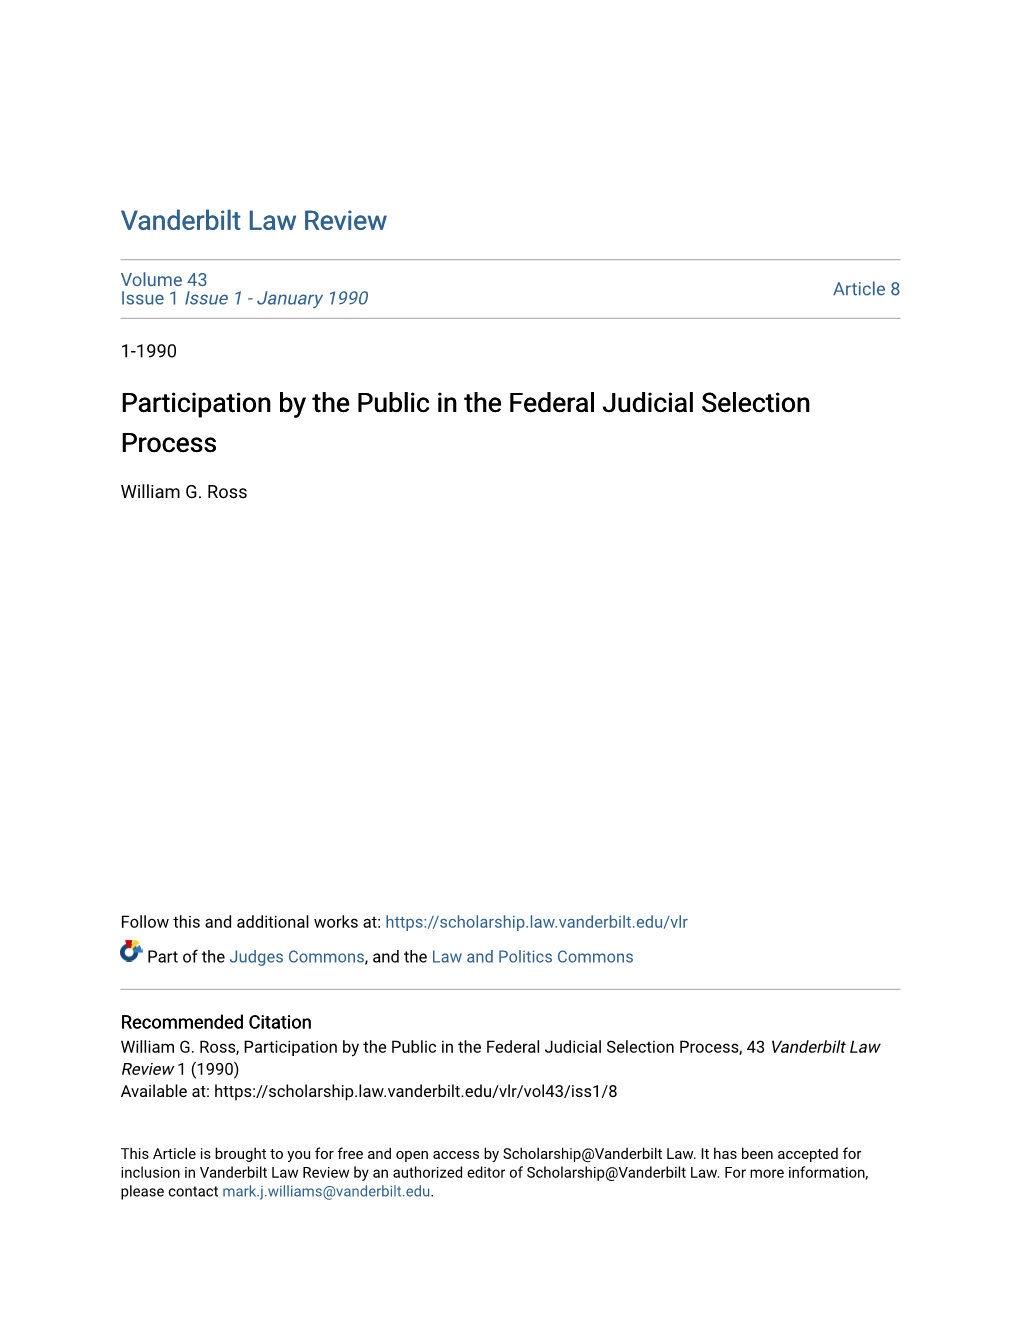 Participation by the Public in the Federal Judicial Selection Process